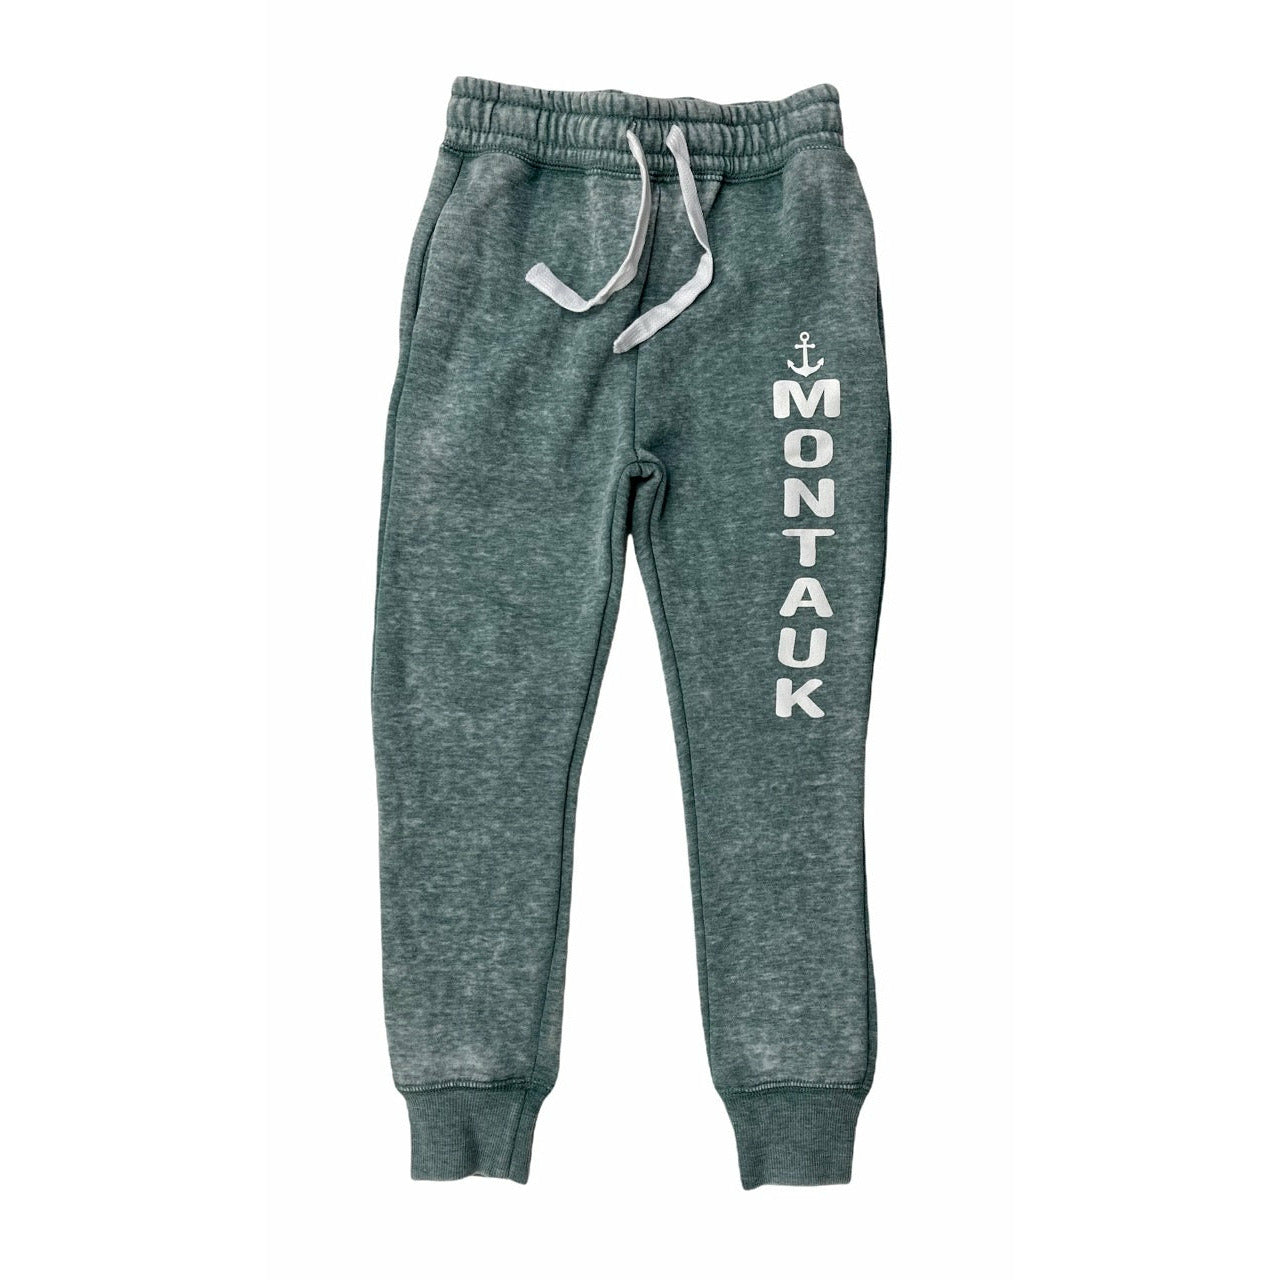 Youth Montauk Anchor Joggers with Drawstring and Pockets in Denim Moss